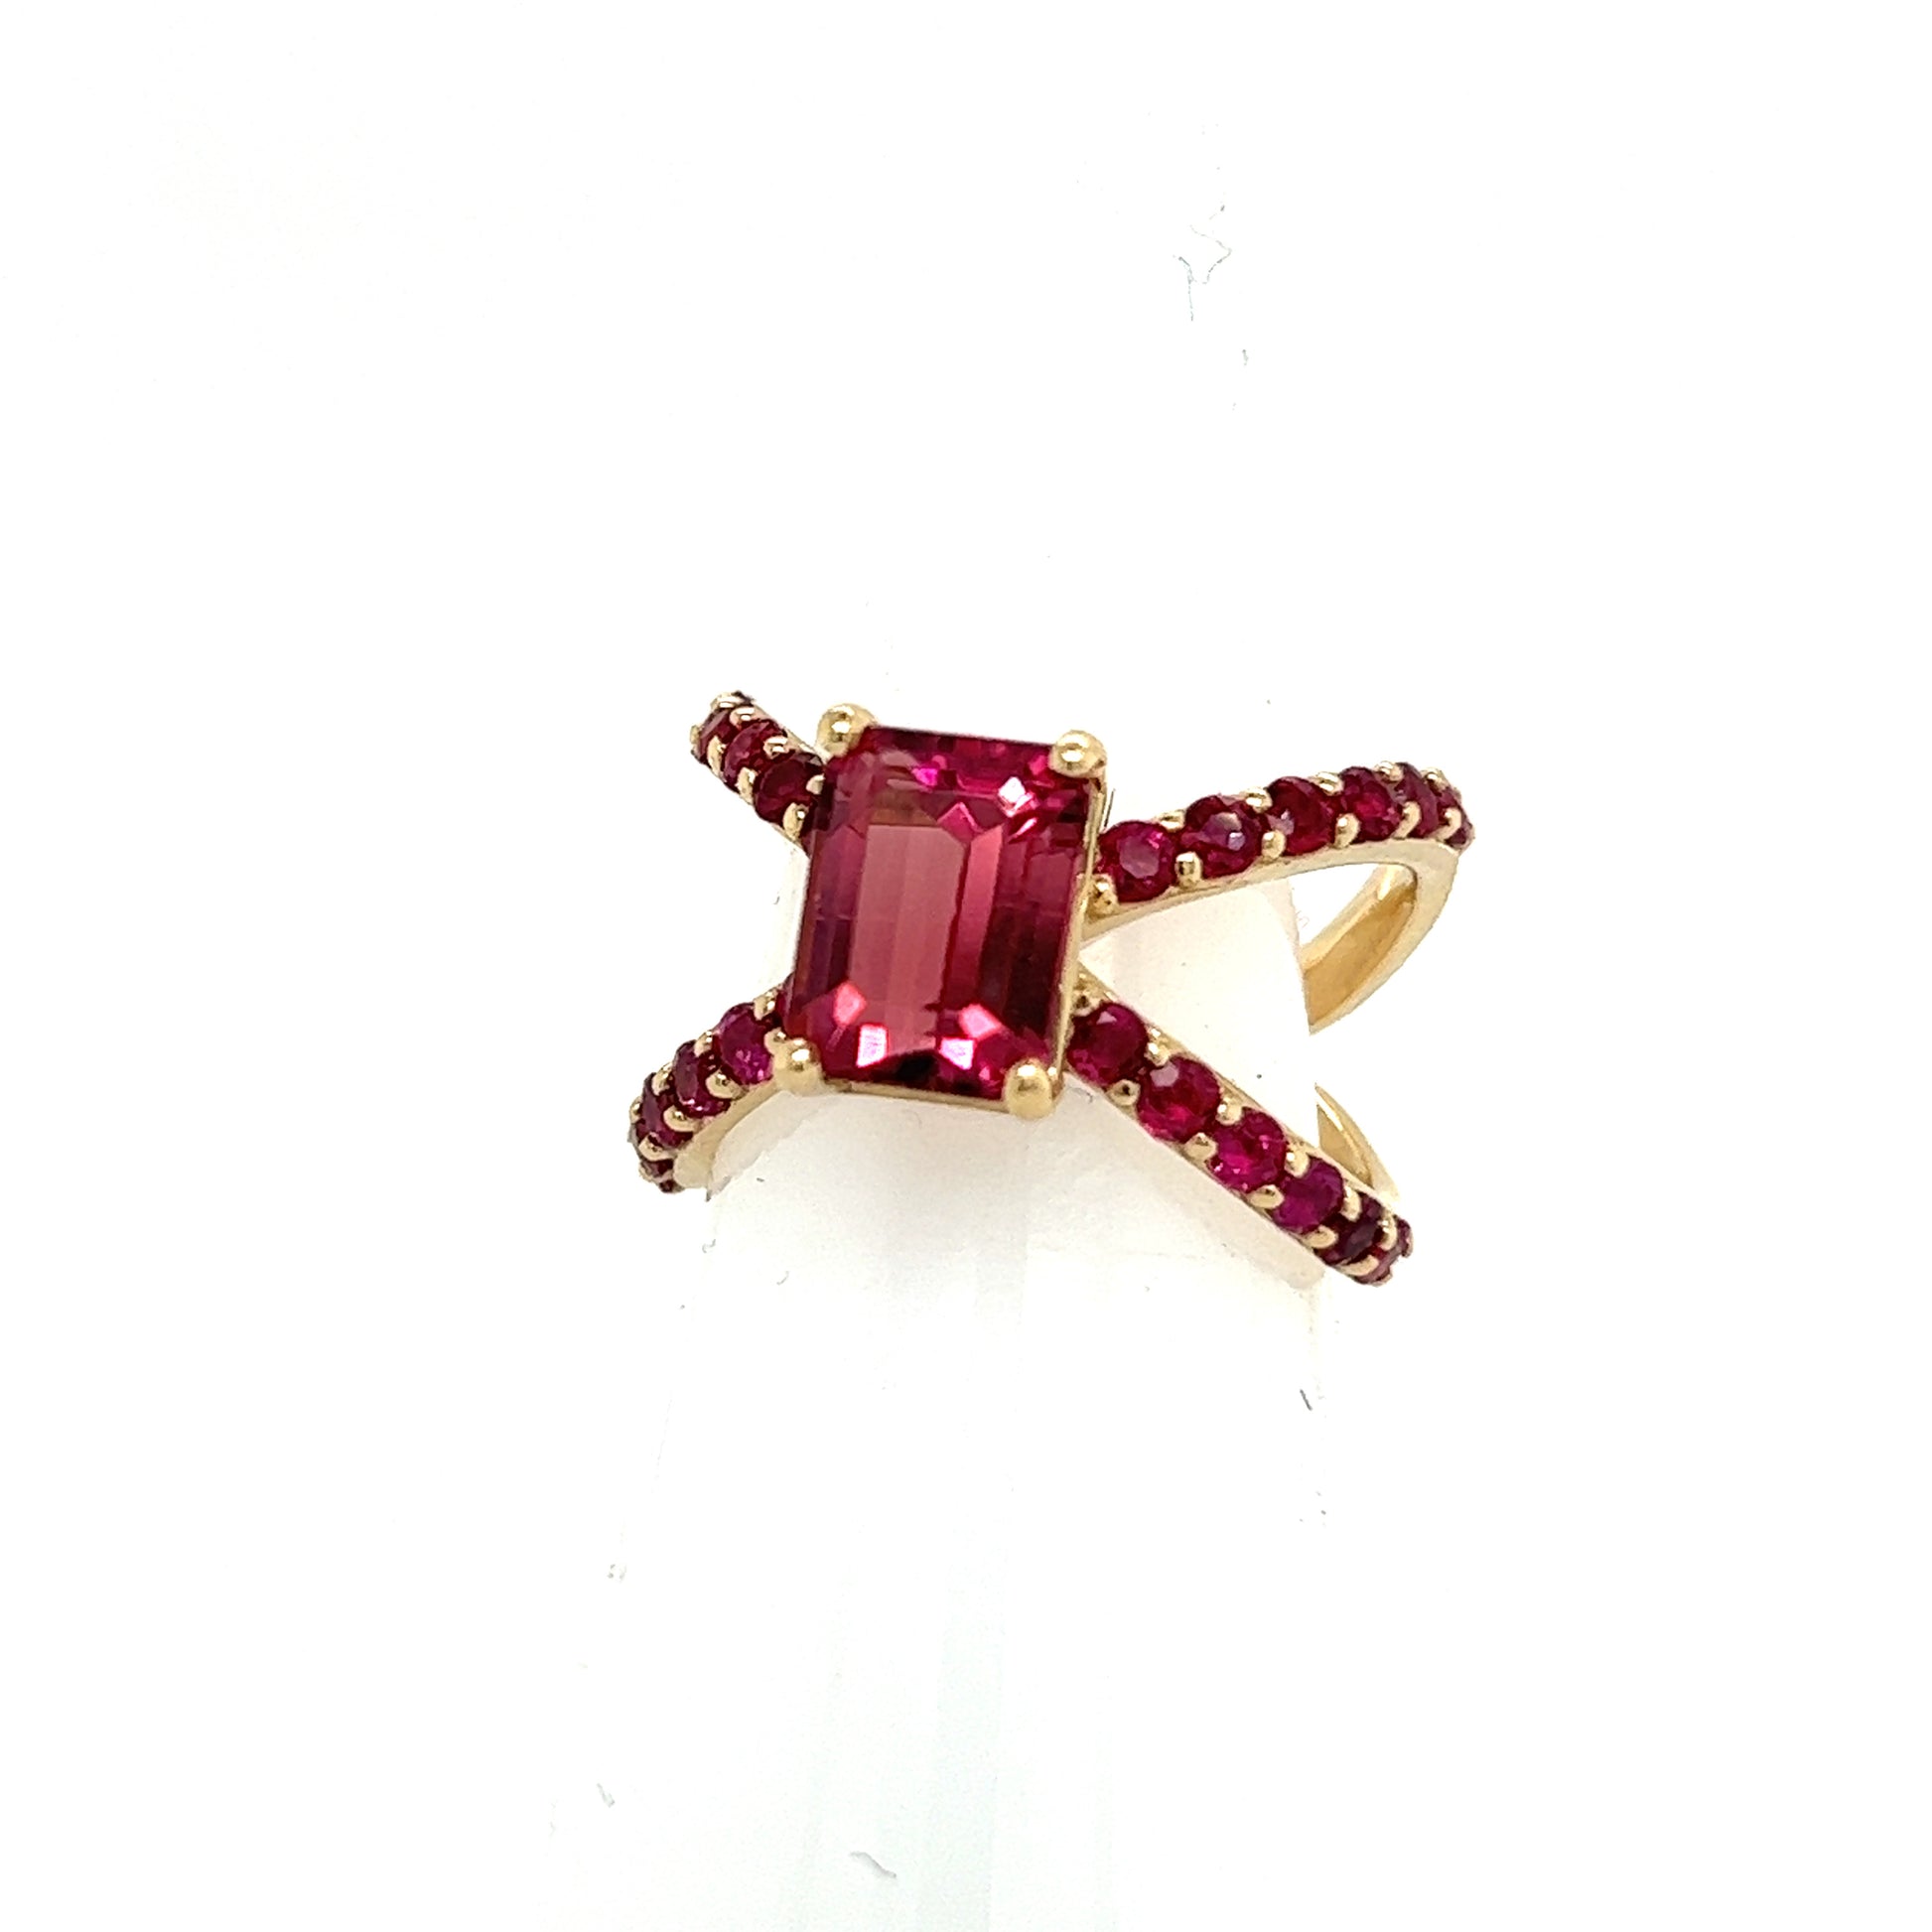 Natural Pink Tourmaline Ruby Ring Size 6 14k Y Gold 3.33 TCW Certified $5,950 216193